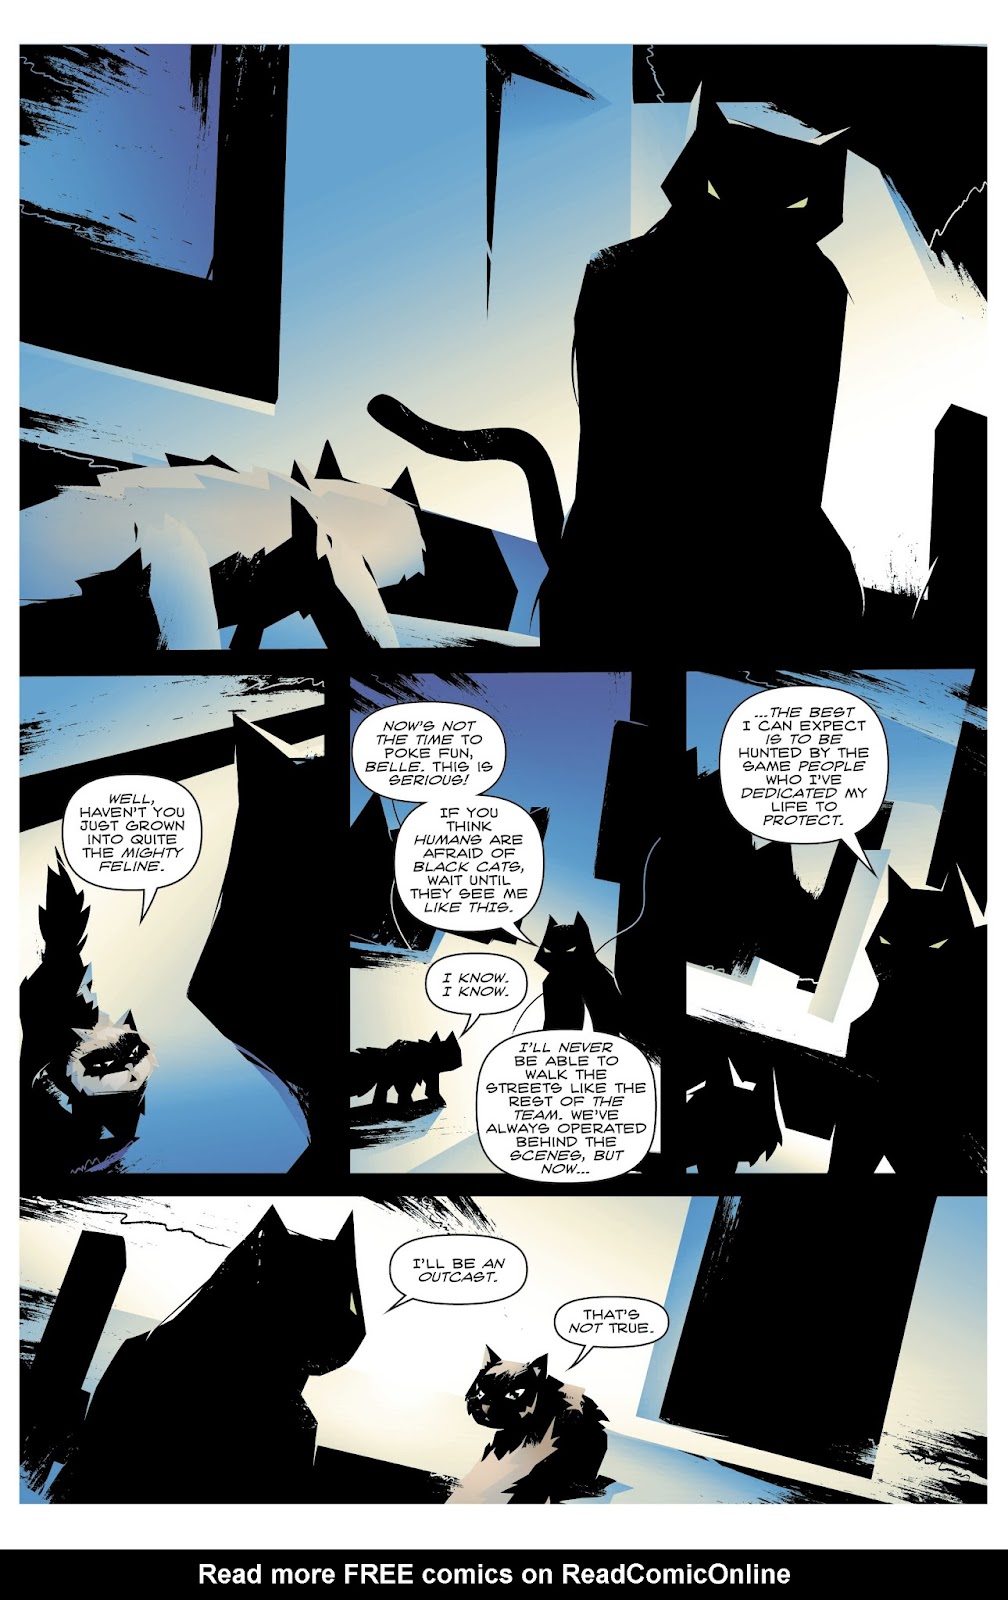 Hero Cats: Midnight Over Stellar City Vol. 2 issue 3 - Page 12